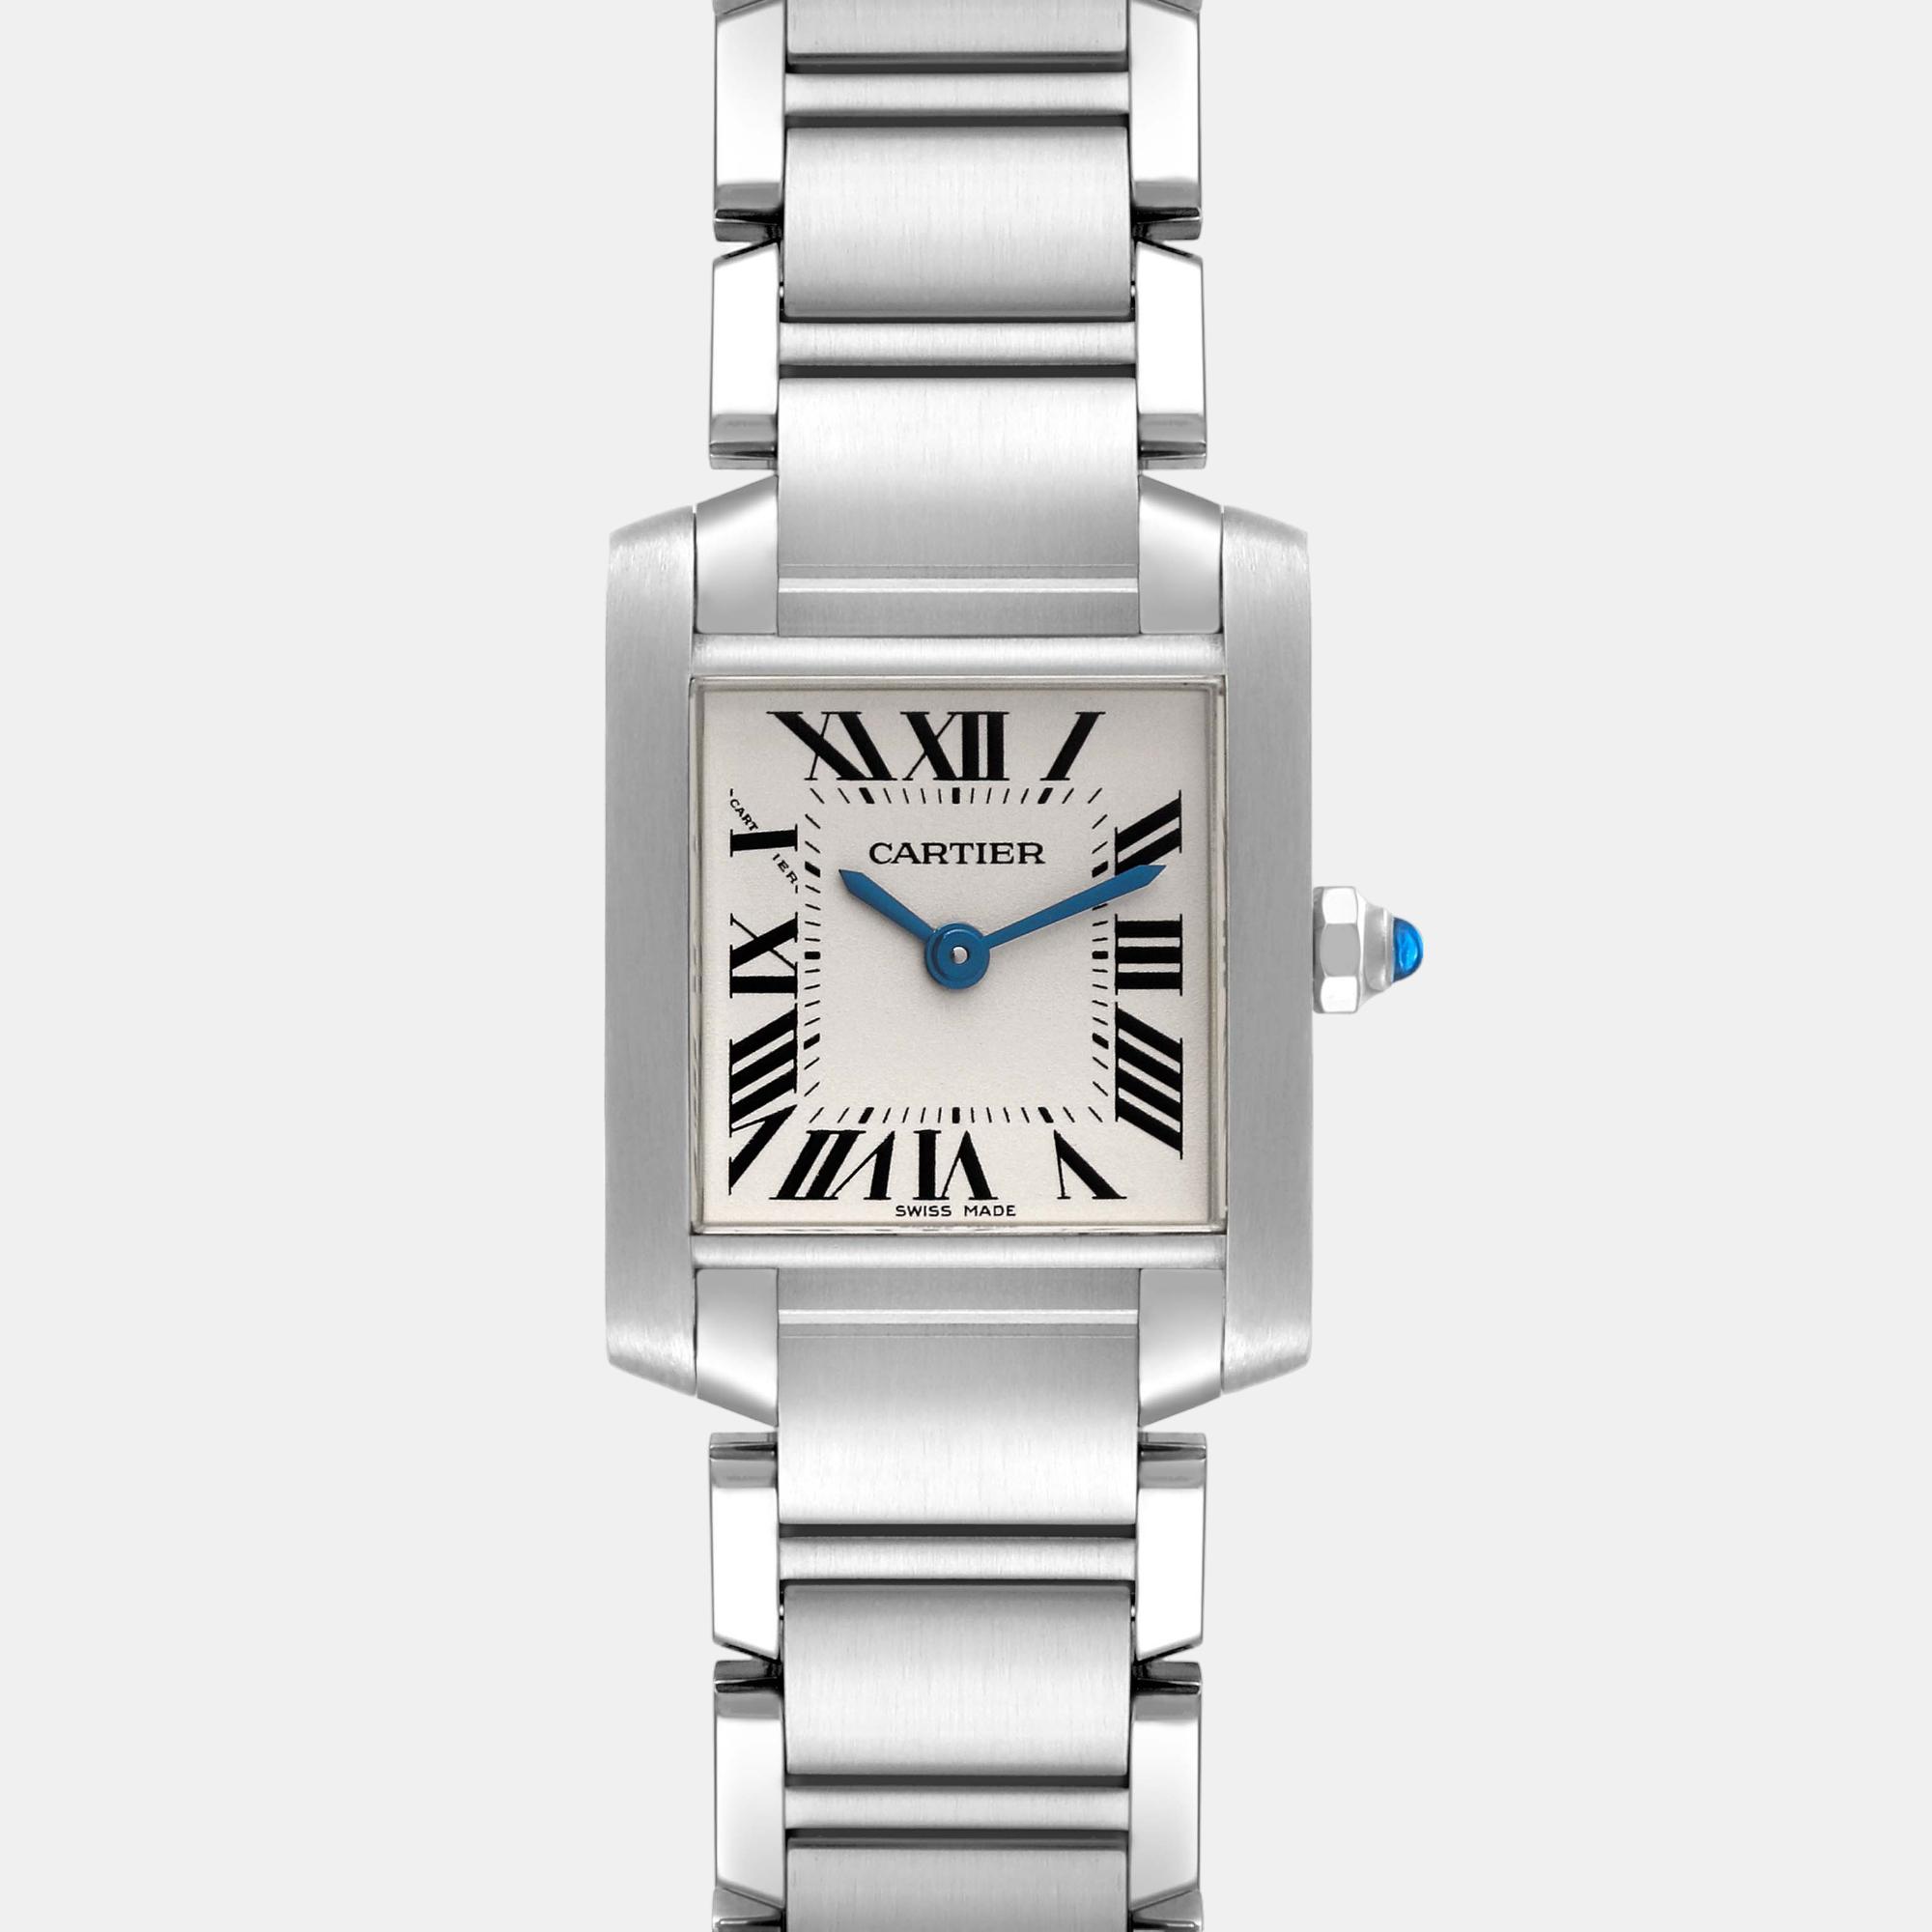 Cartier Tank Francaise Small Silver Dial Steel Ladies Watch W51008Q3 20 X 25 Mm